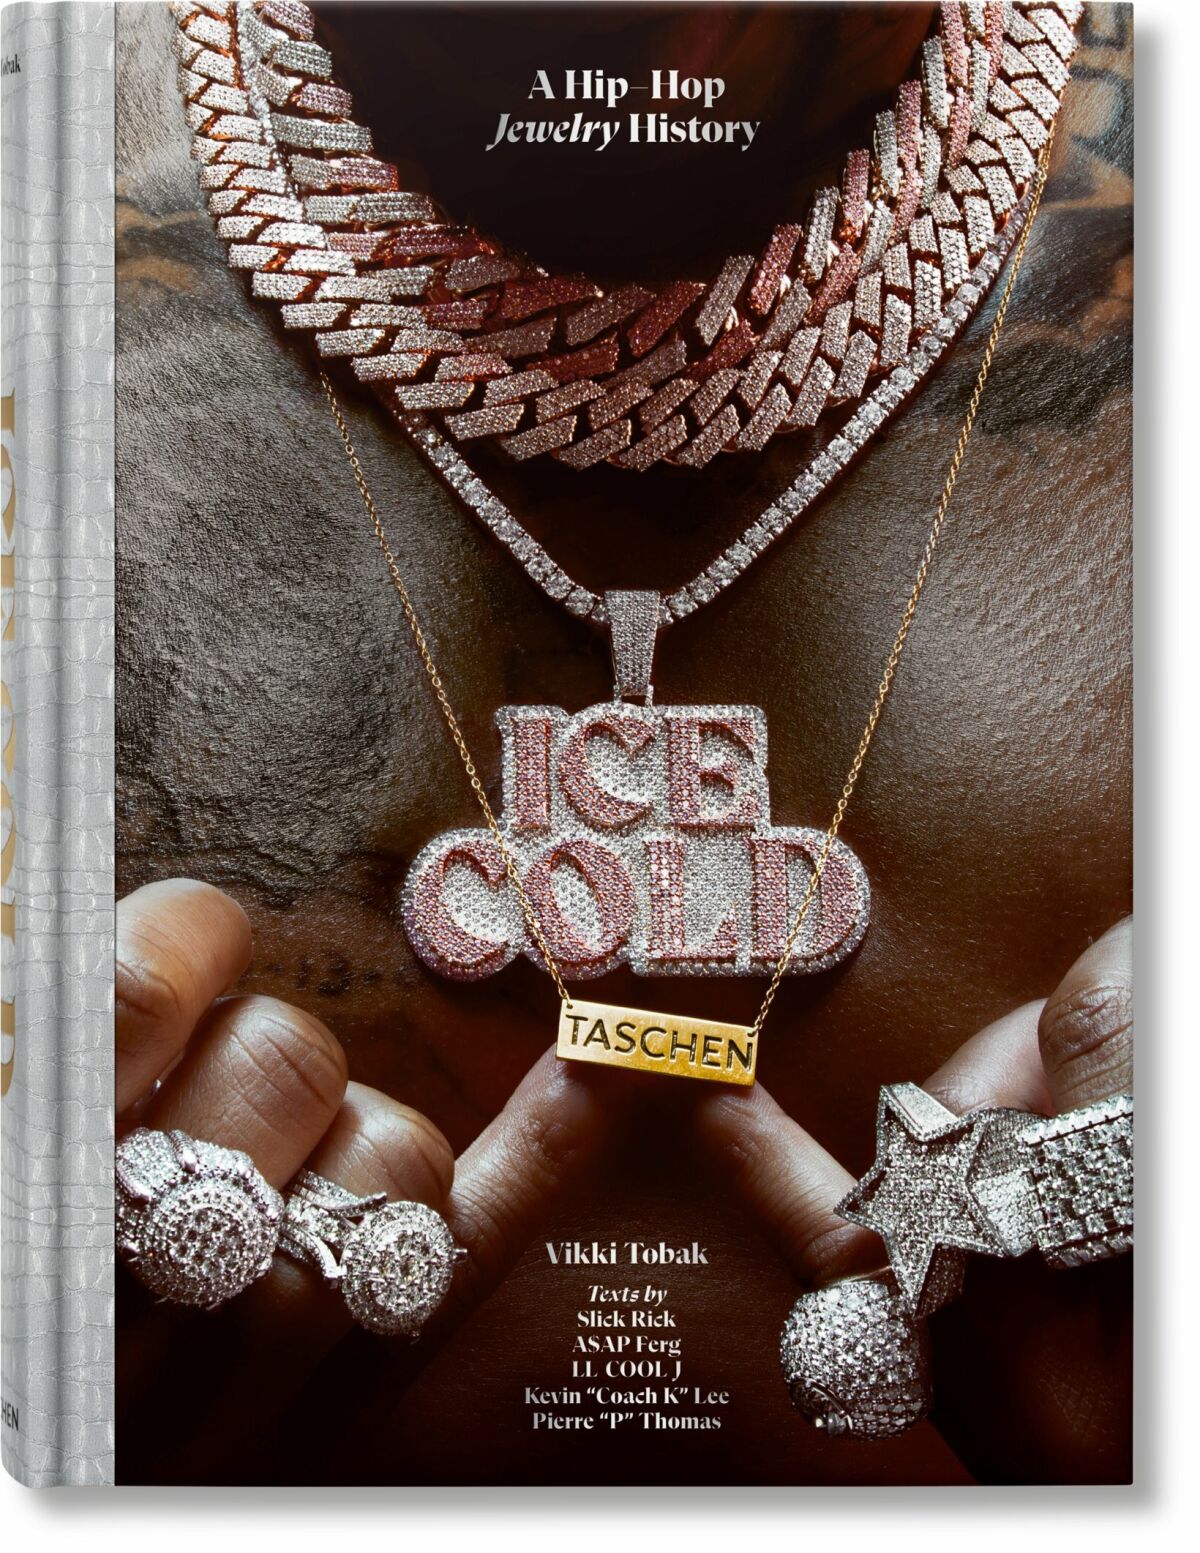 The cover of "Freezing," its title is written as a pendant.